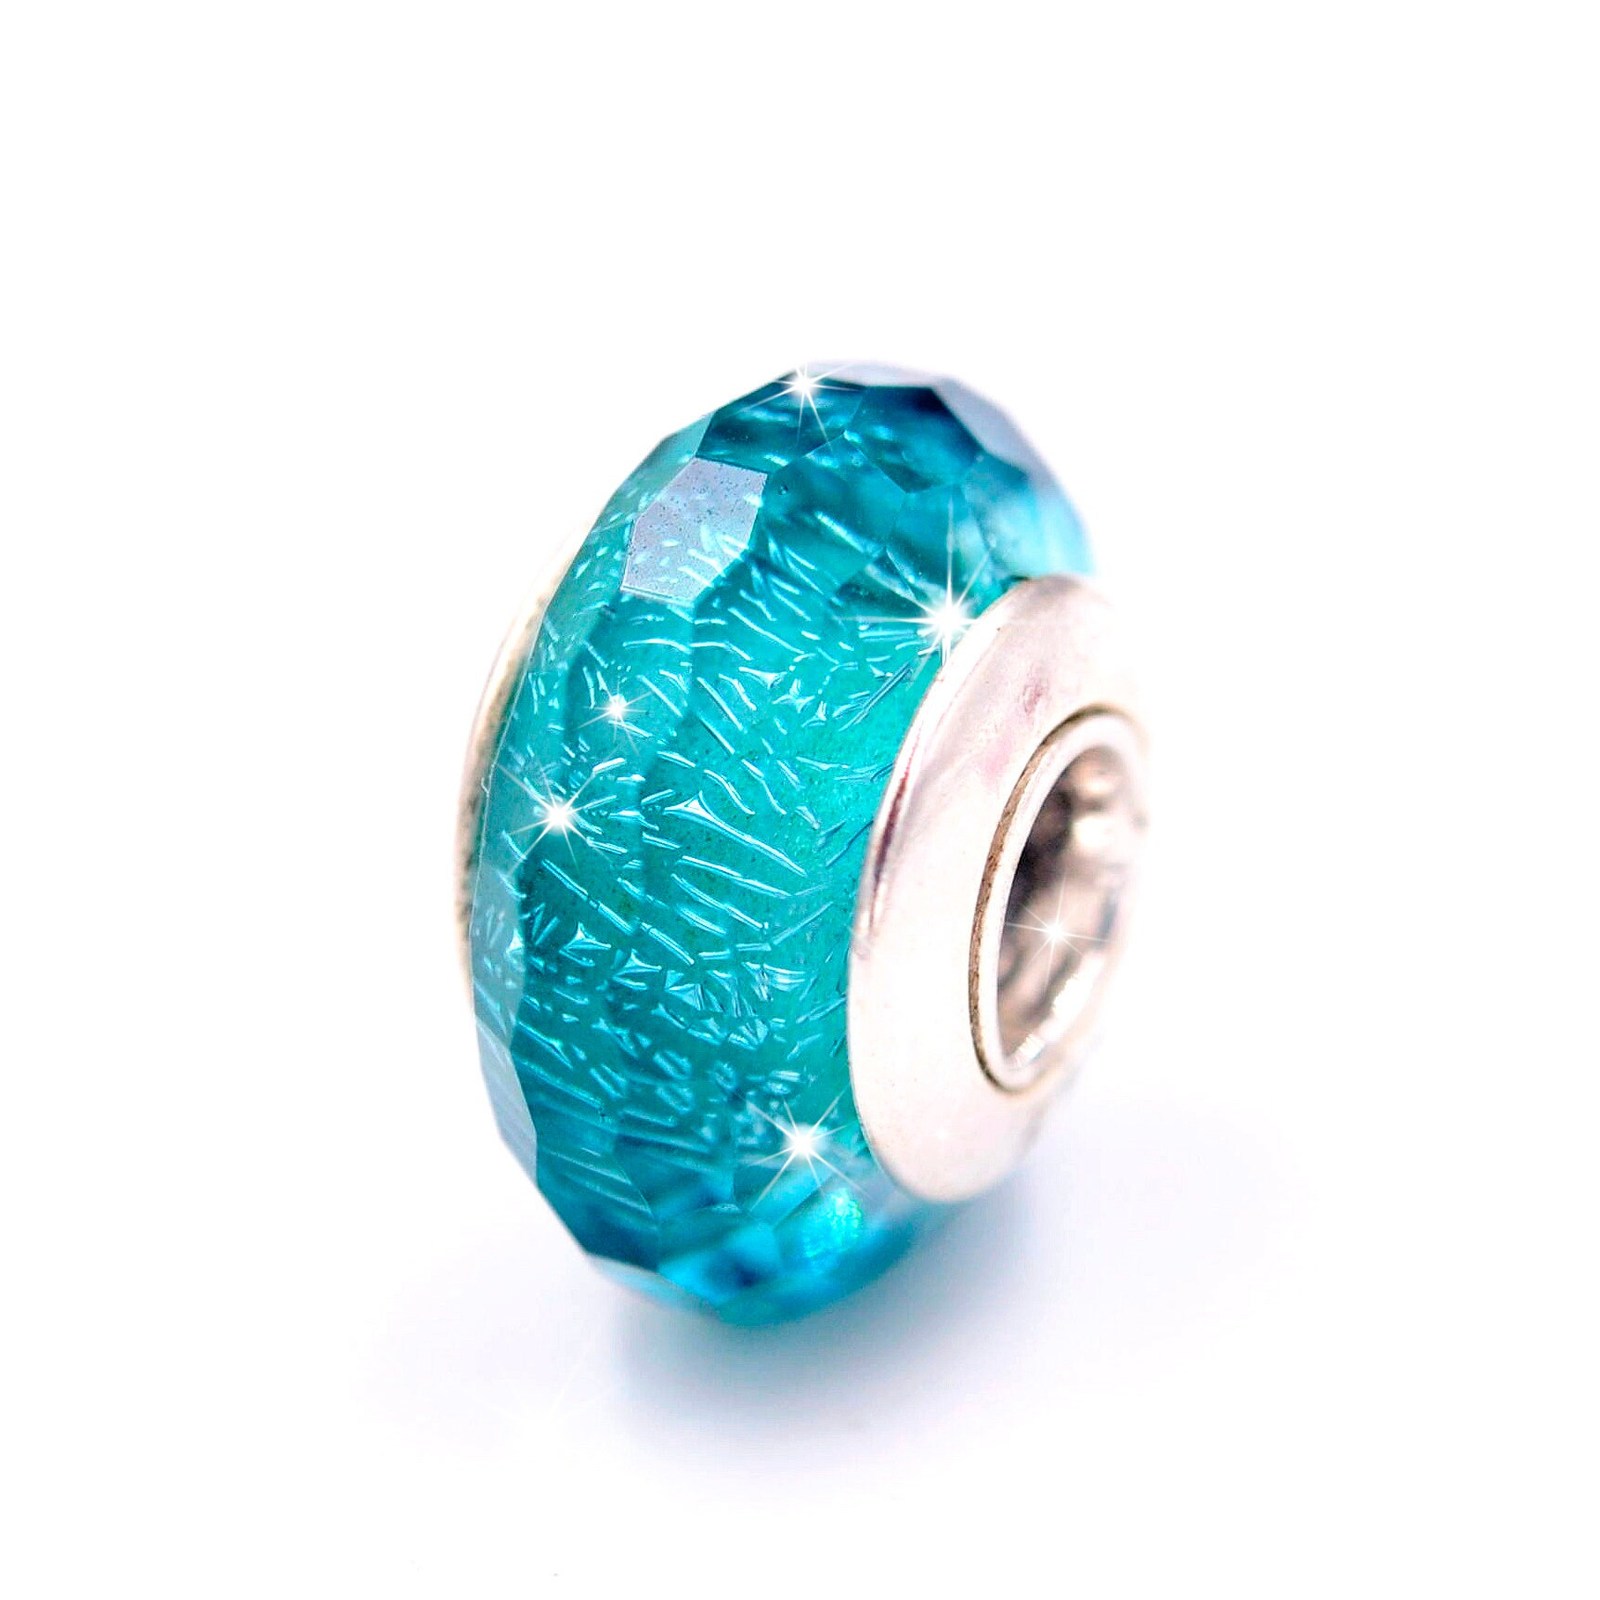 TOP 2016 Summer 925 Silver Handmade Teal Shimmer Faceted Murano Glass Charm Bead - $12.50